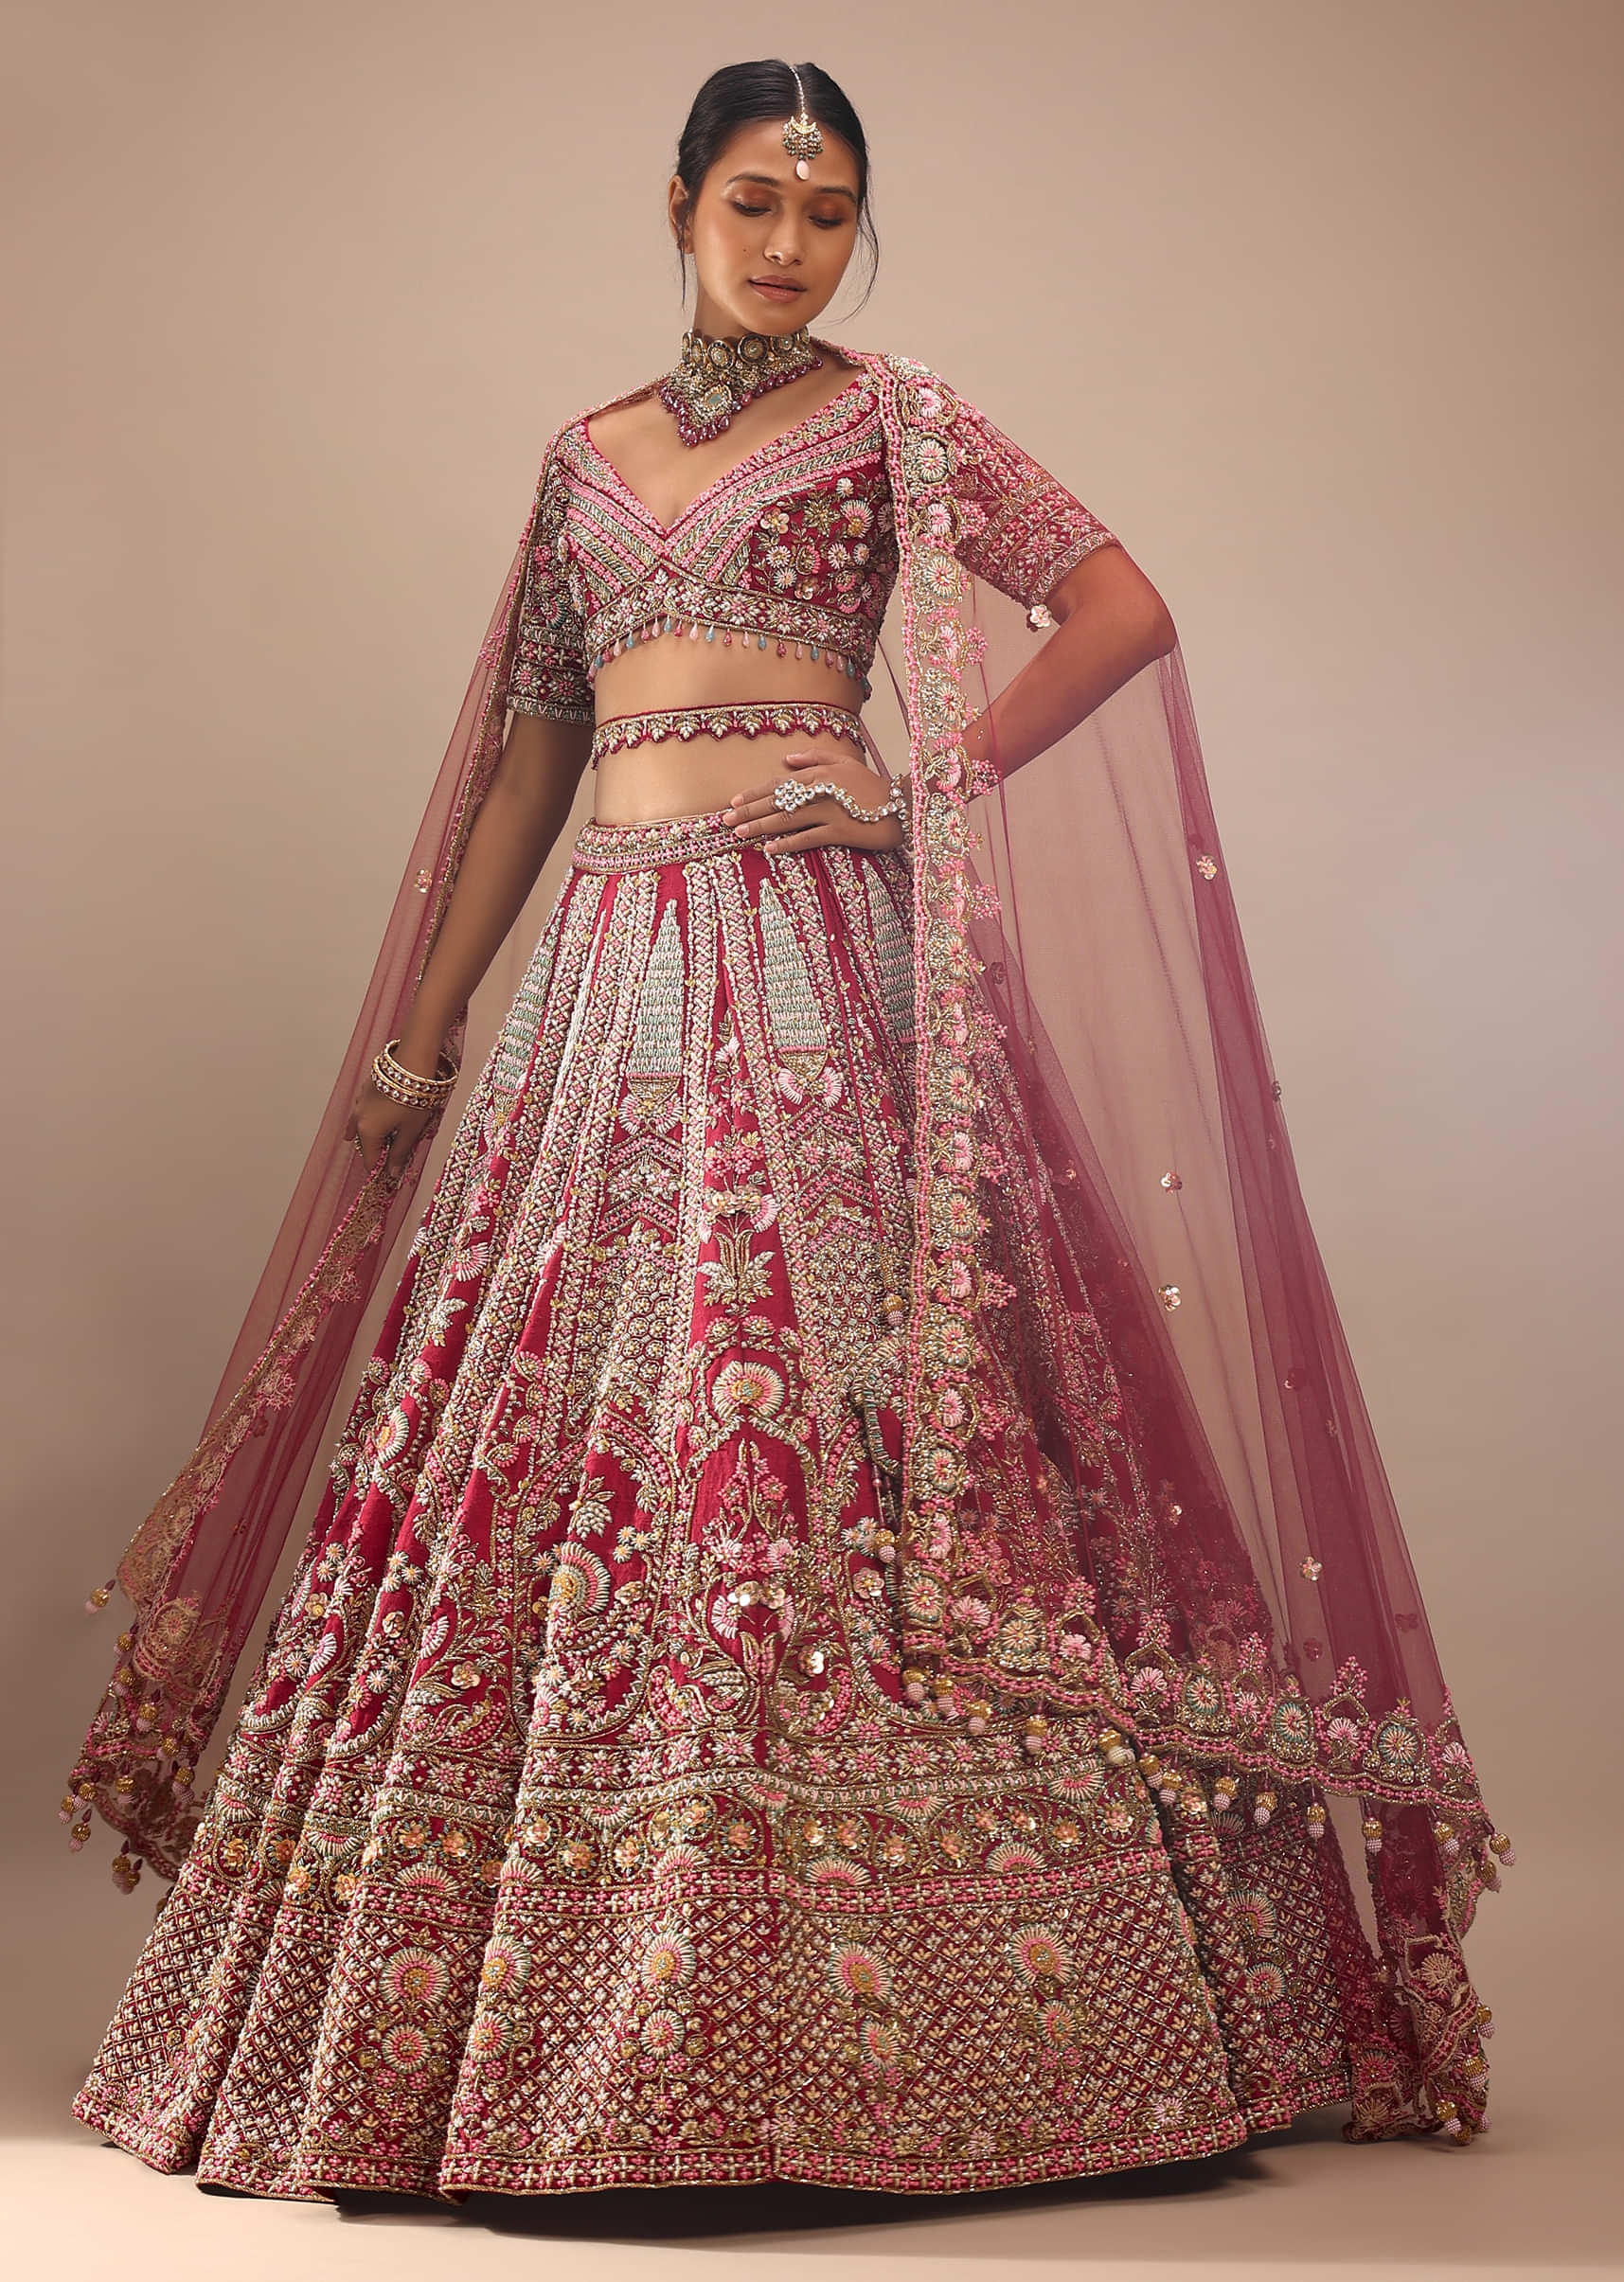 Red Lehenga Choli In Raw Silk With Hand Embroidered Multicolored Heritage Kalis And Embossed Floral Motifs